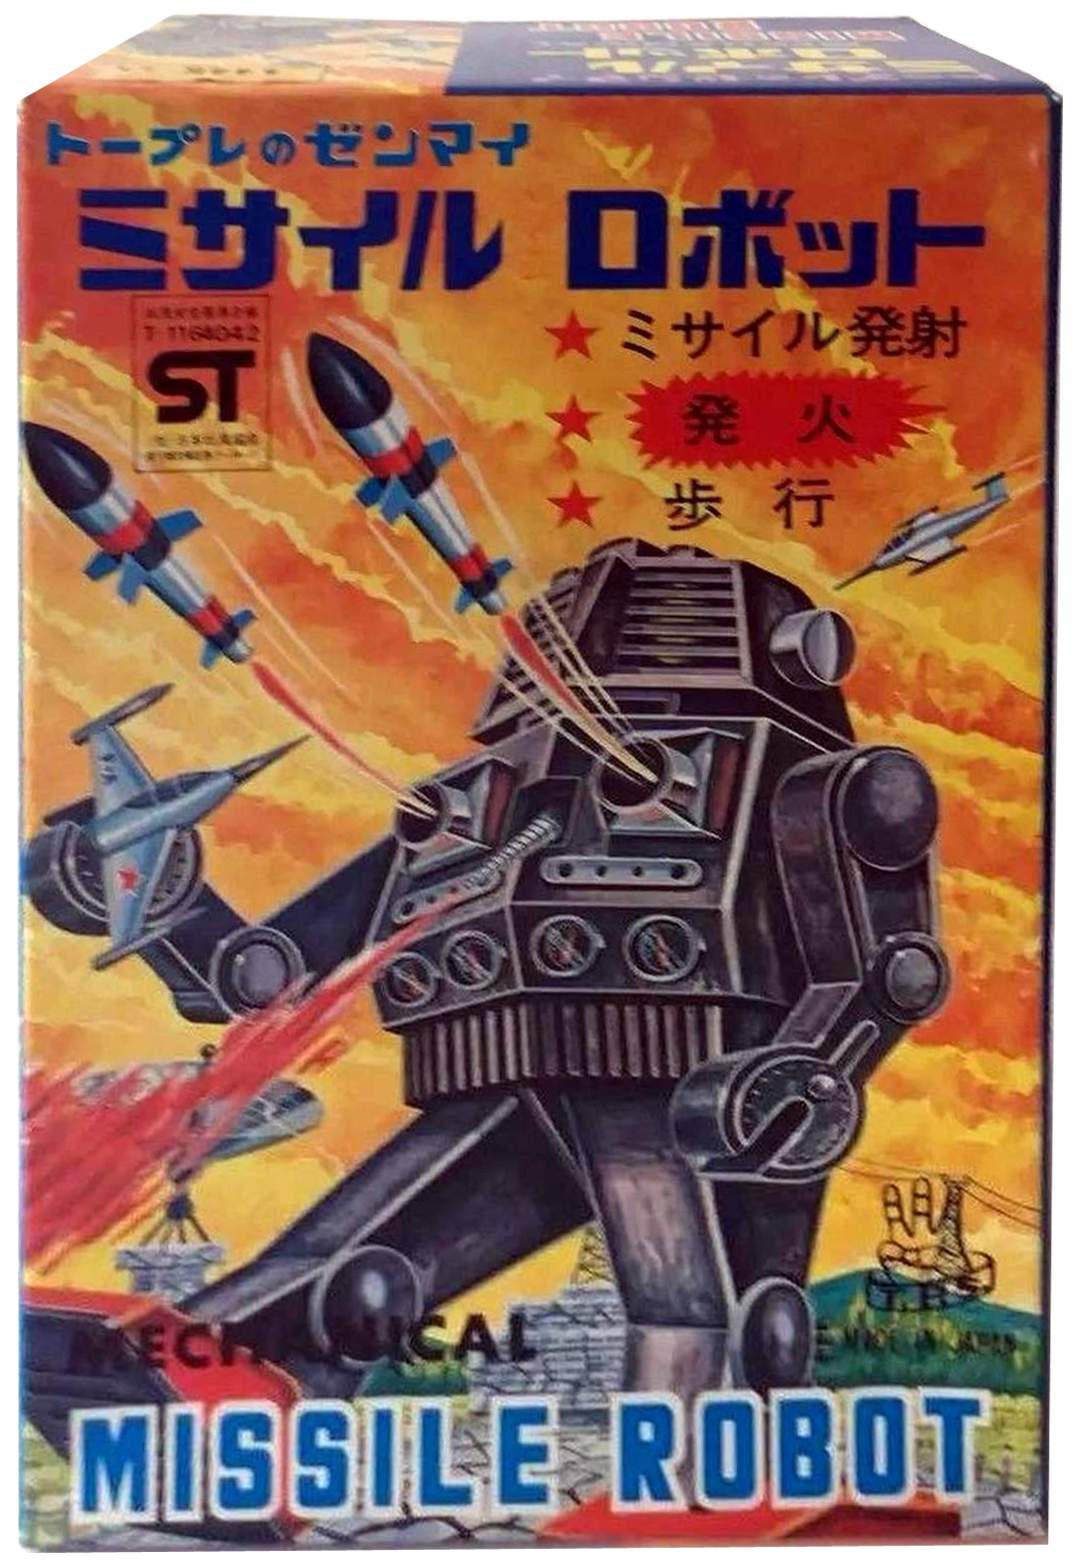 Mechanical Missile Robot by T.P.S. - The Old Robots Web Site